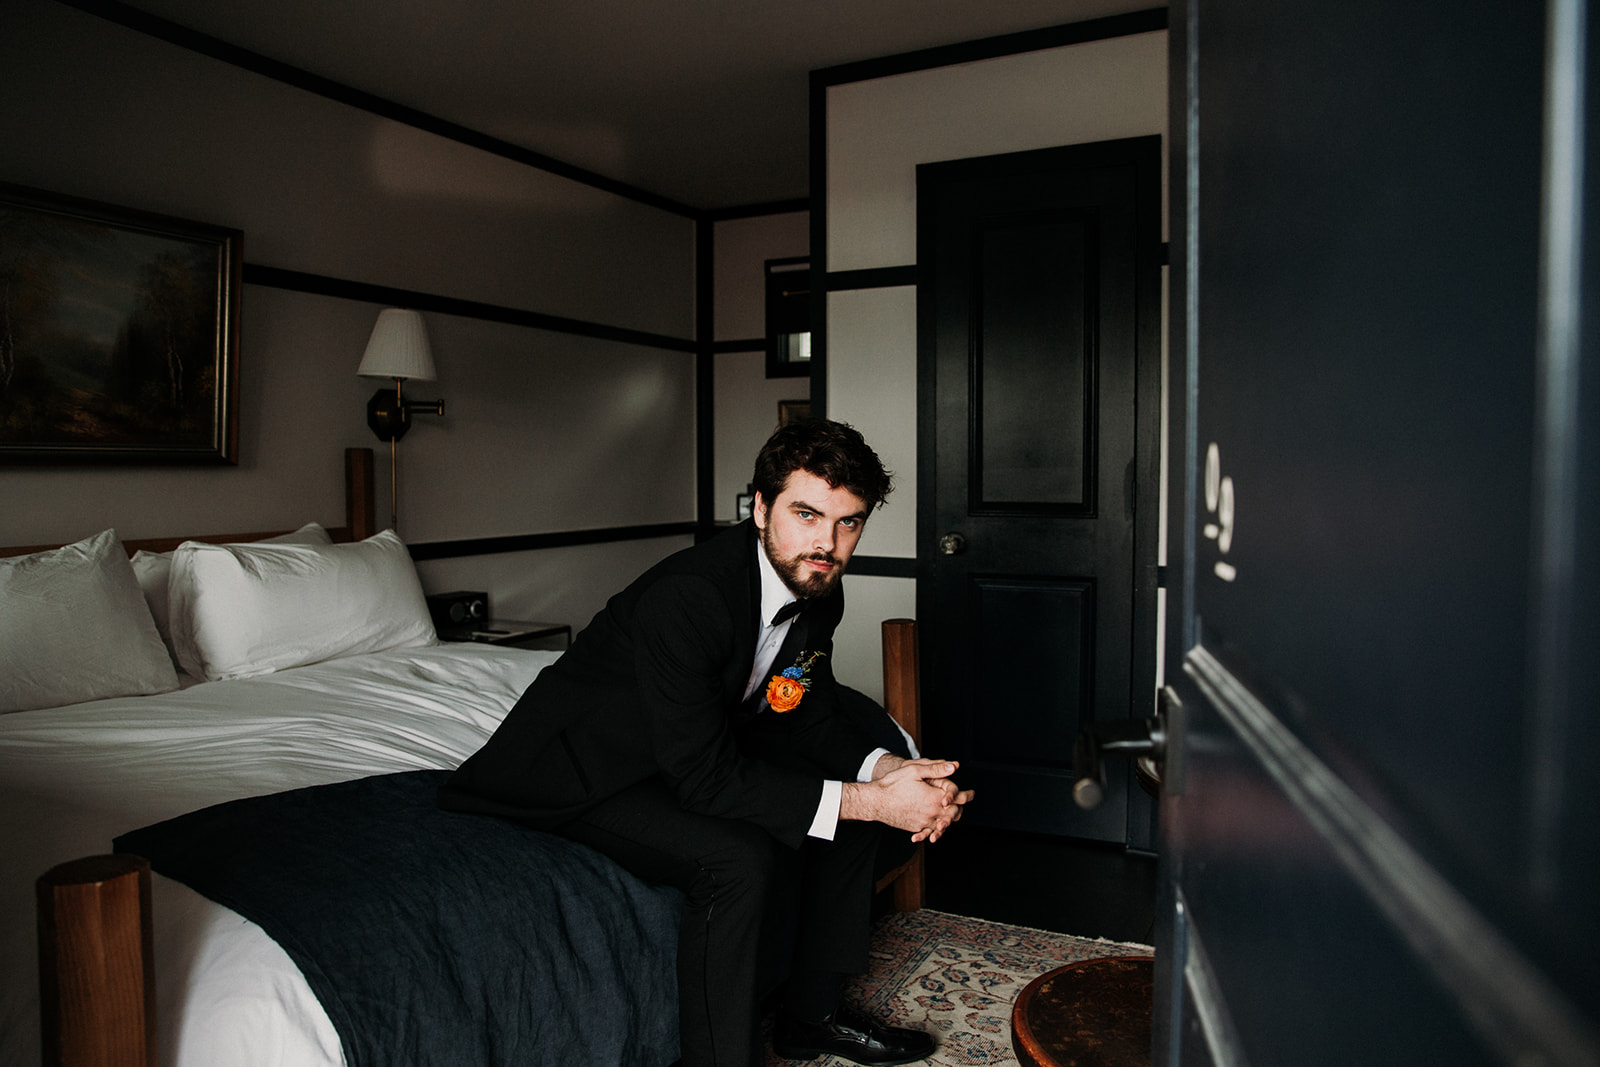 Groom in suit sitting on a bed